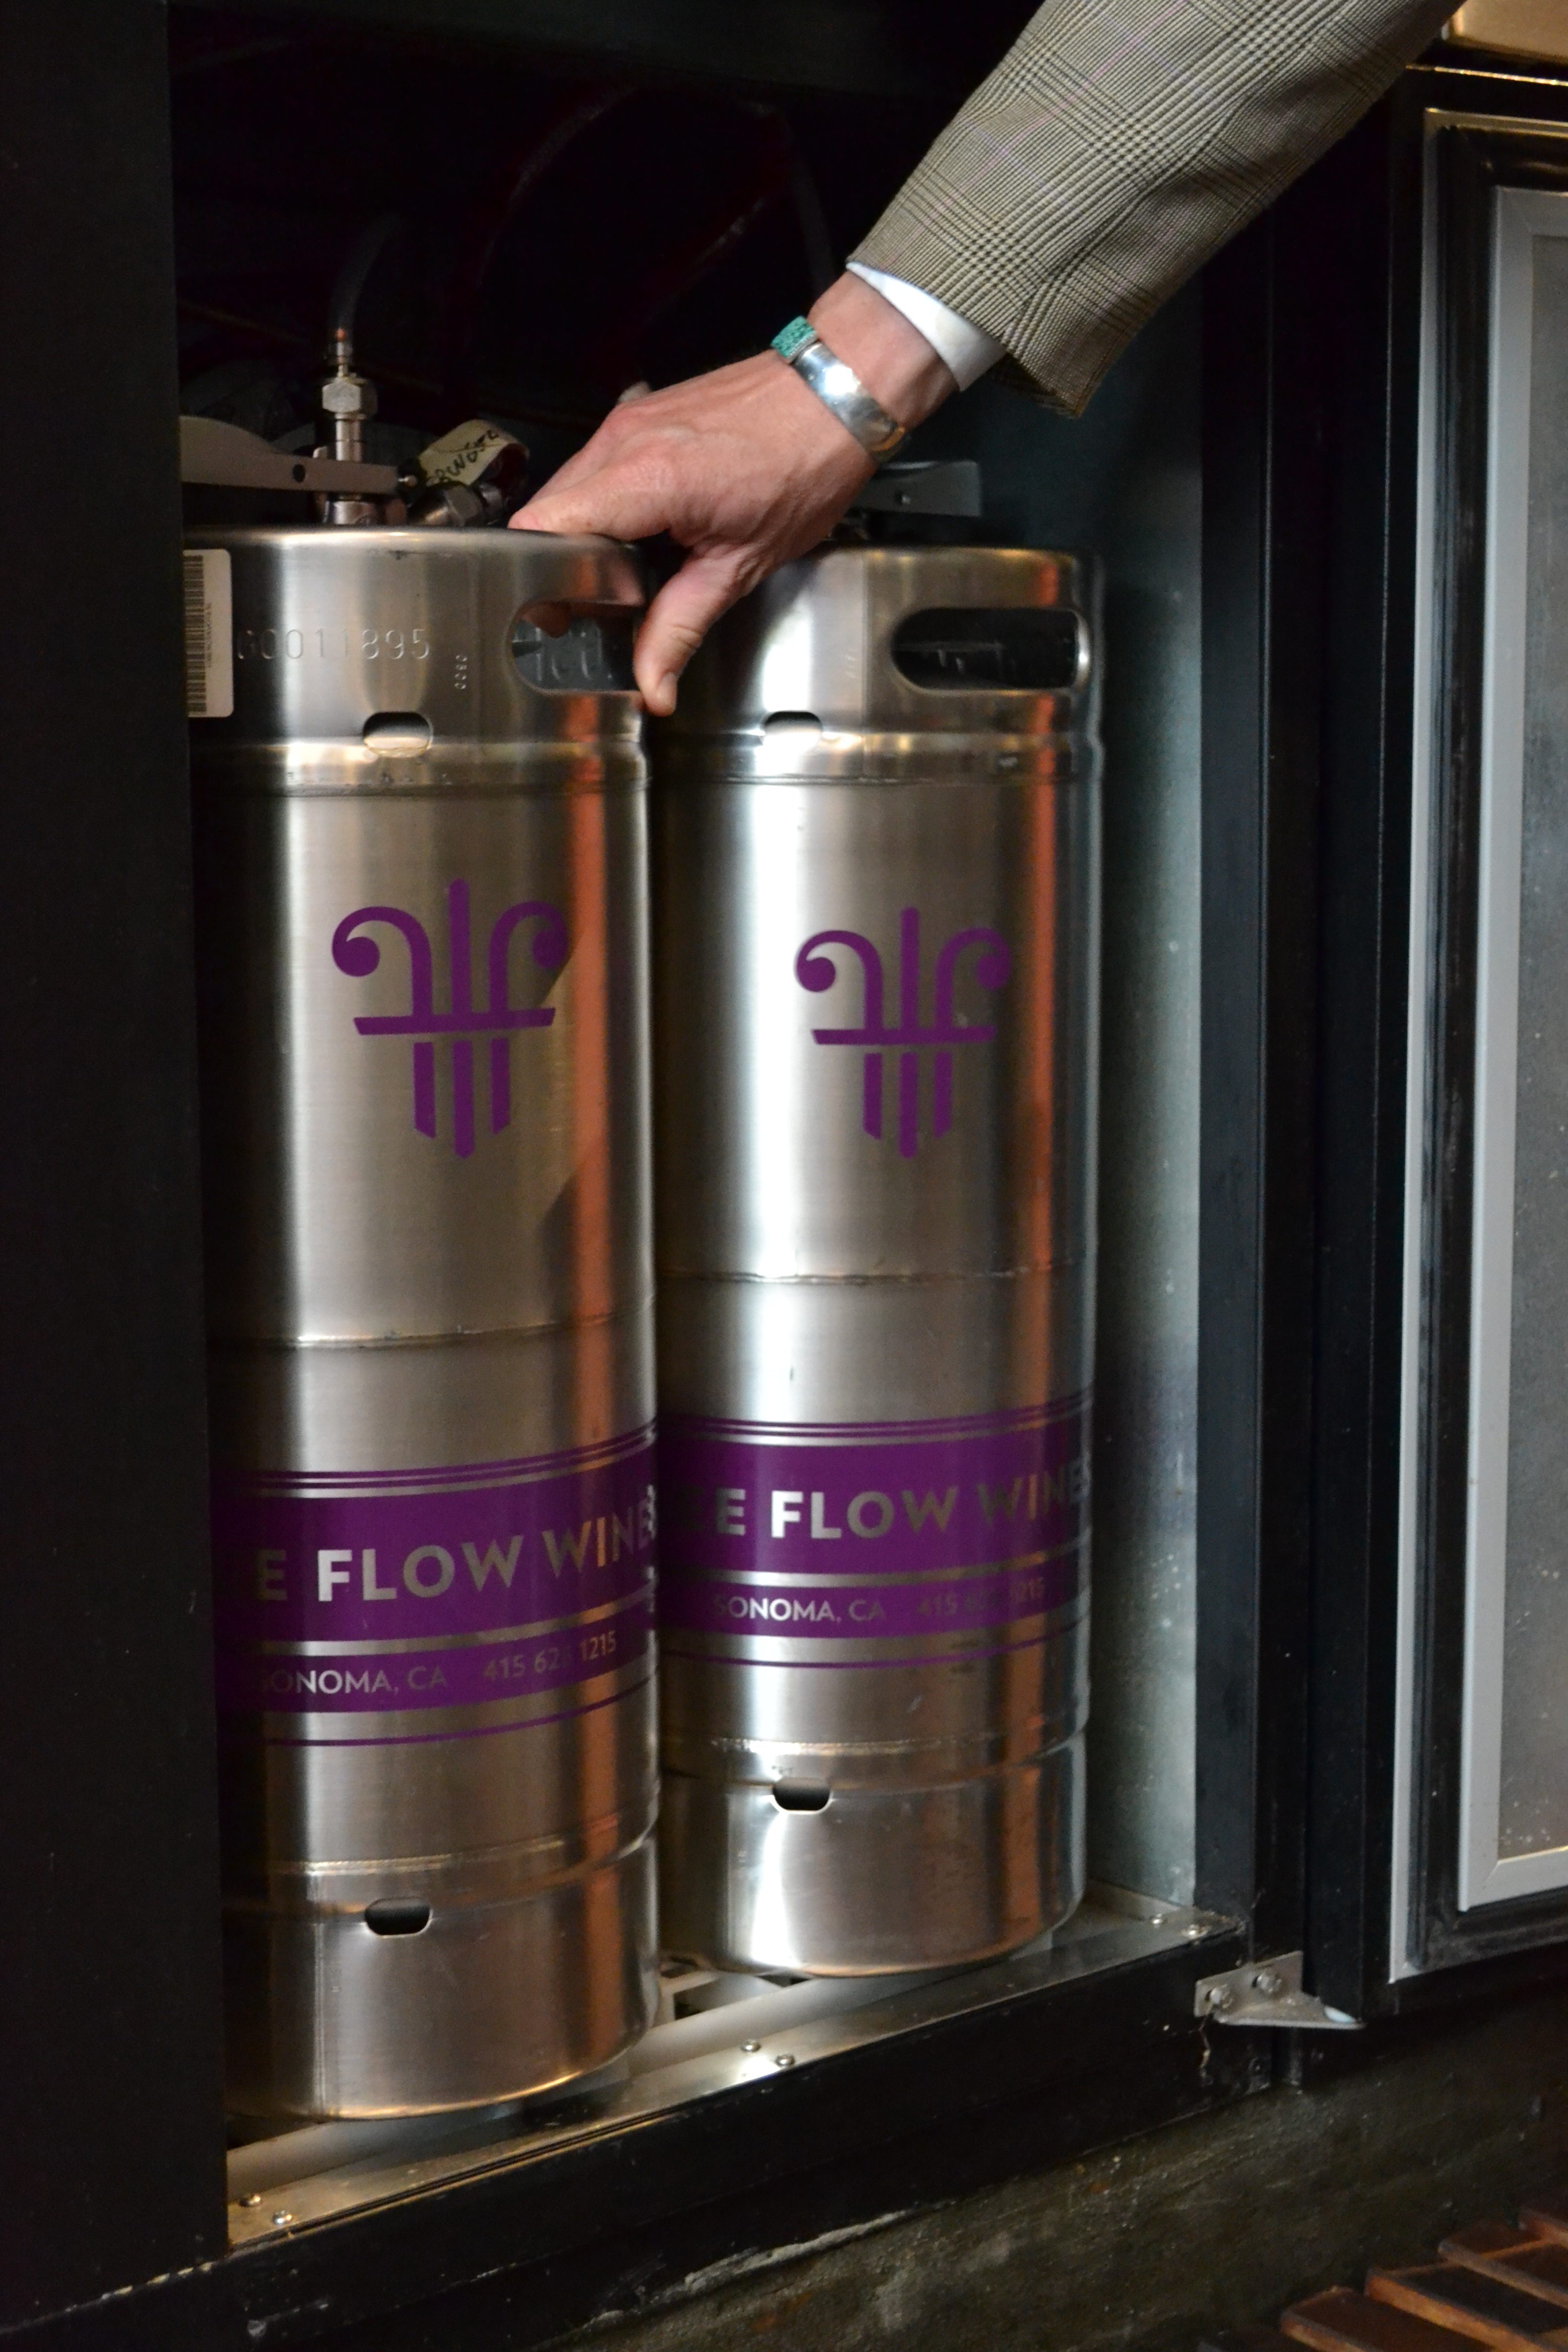 Free Flow Wines is a more sustainable, environmentally friendly way to serve wine on tap for the wine and hospitality industries.